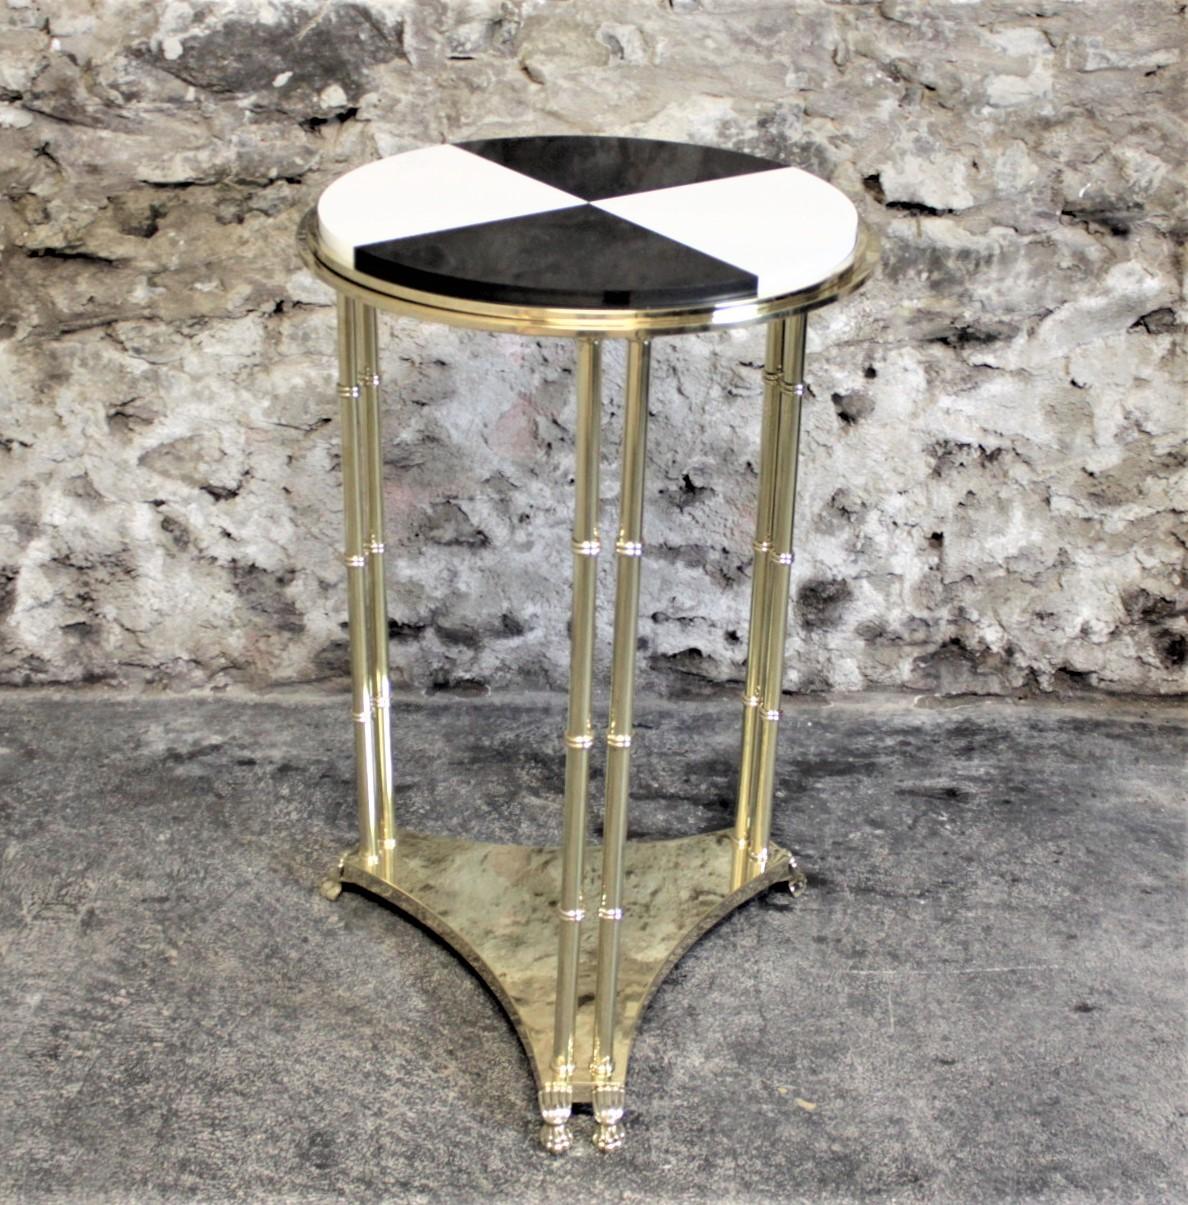 This midcentury era heavy solid brass pedestal side table with a marble top has no maker's marks or labels, but presumed to have been made in the United States in circa 1970 in an Empire Revival style. The base is solid brass with a circular raised